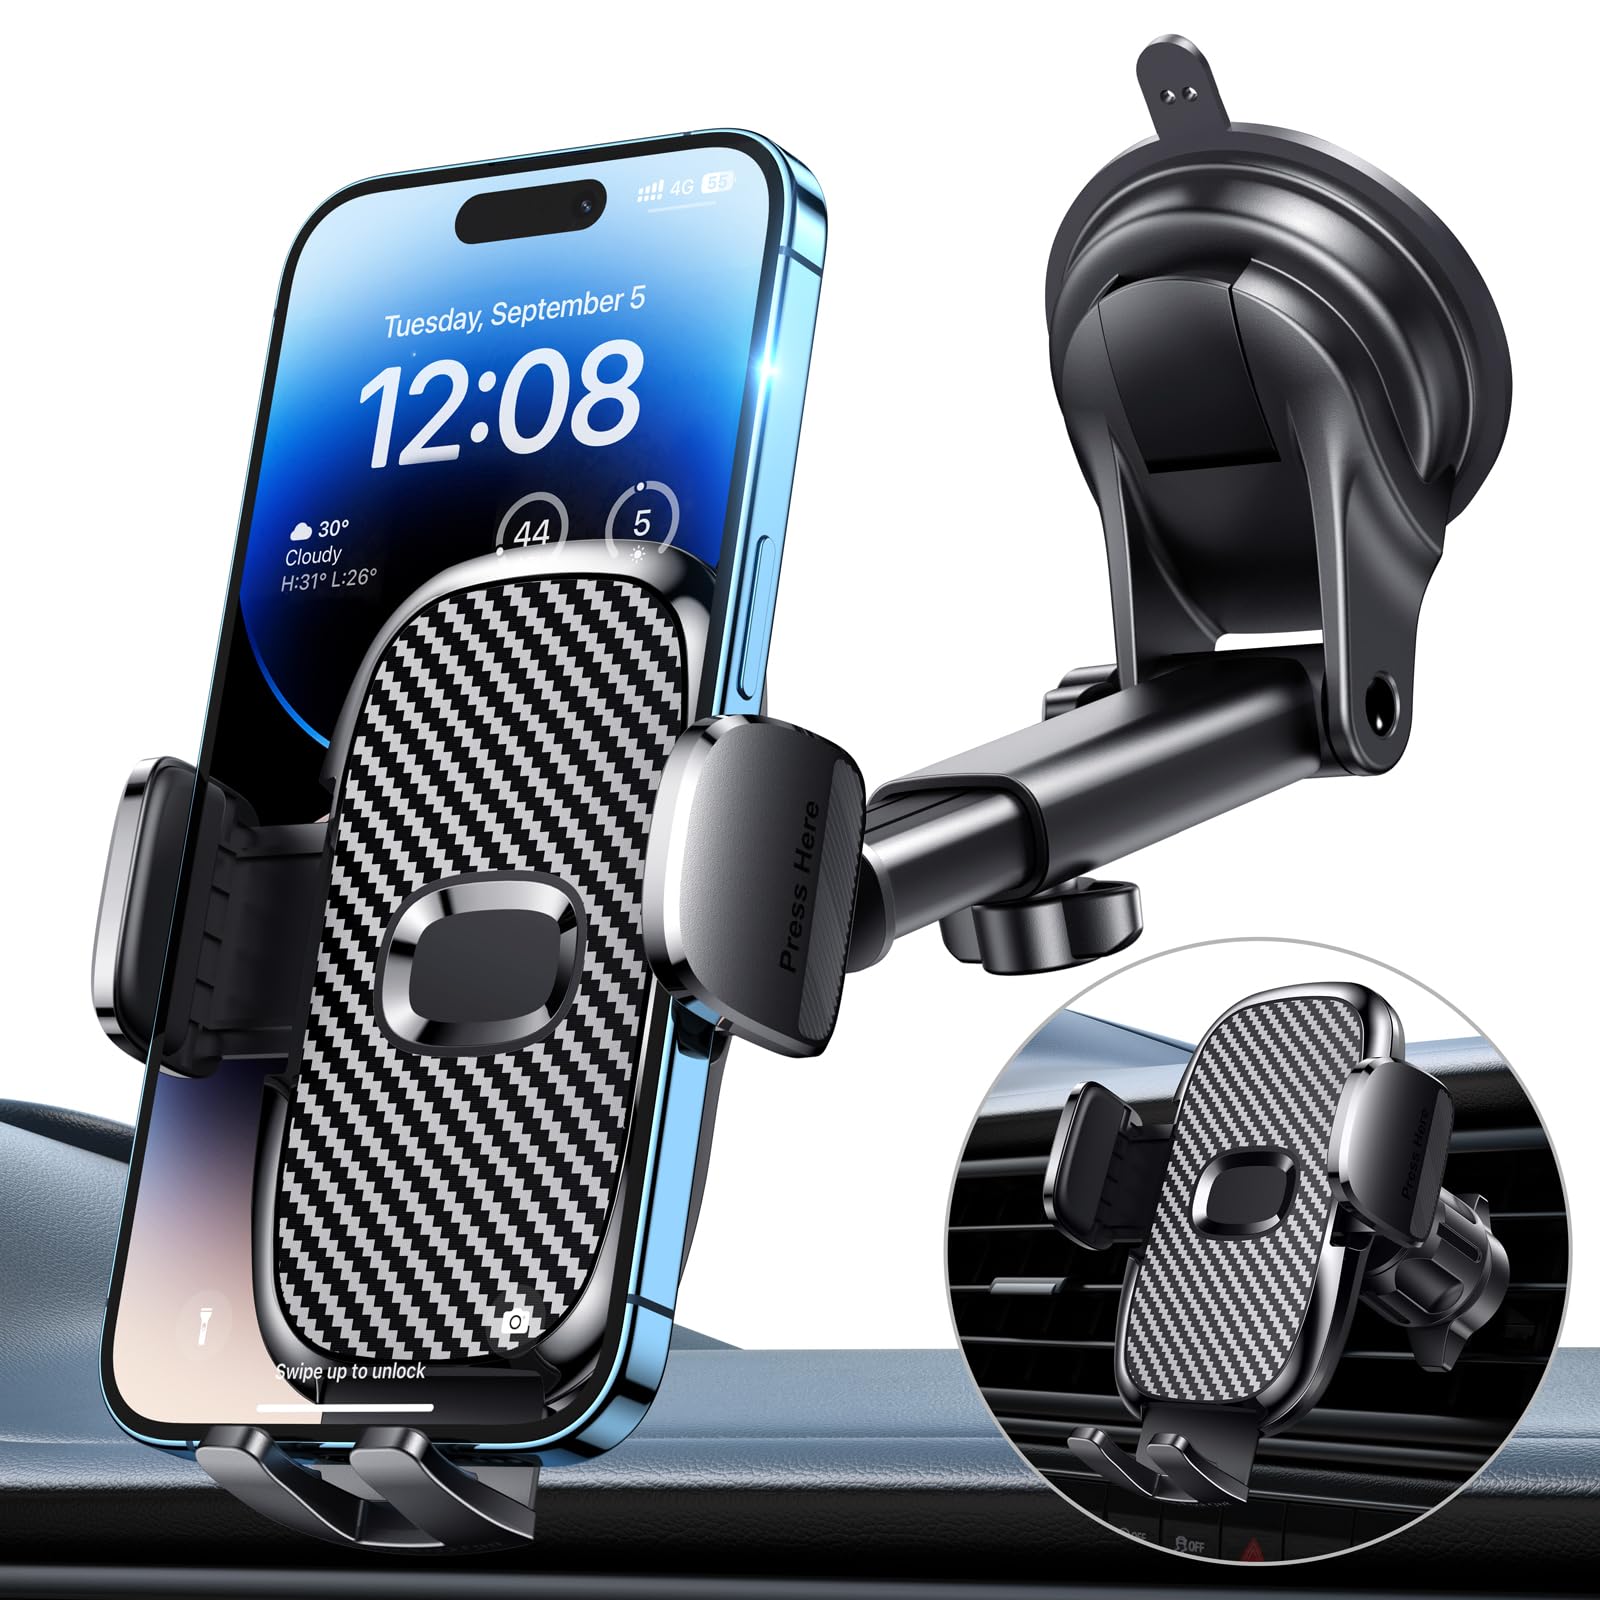 FESIYOYE Car Phone Holder[Military-Grade 360°Suction Cup]Phone Holders for Your Car Universal Accessories Air Vent Dashboard Windshield Phone Mount Automotive Cradles Fit for iPhone Android Smartphone